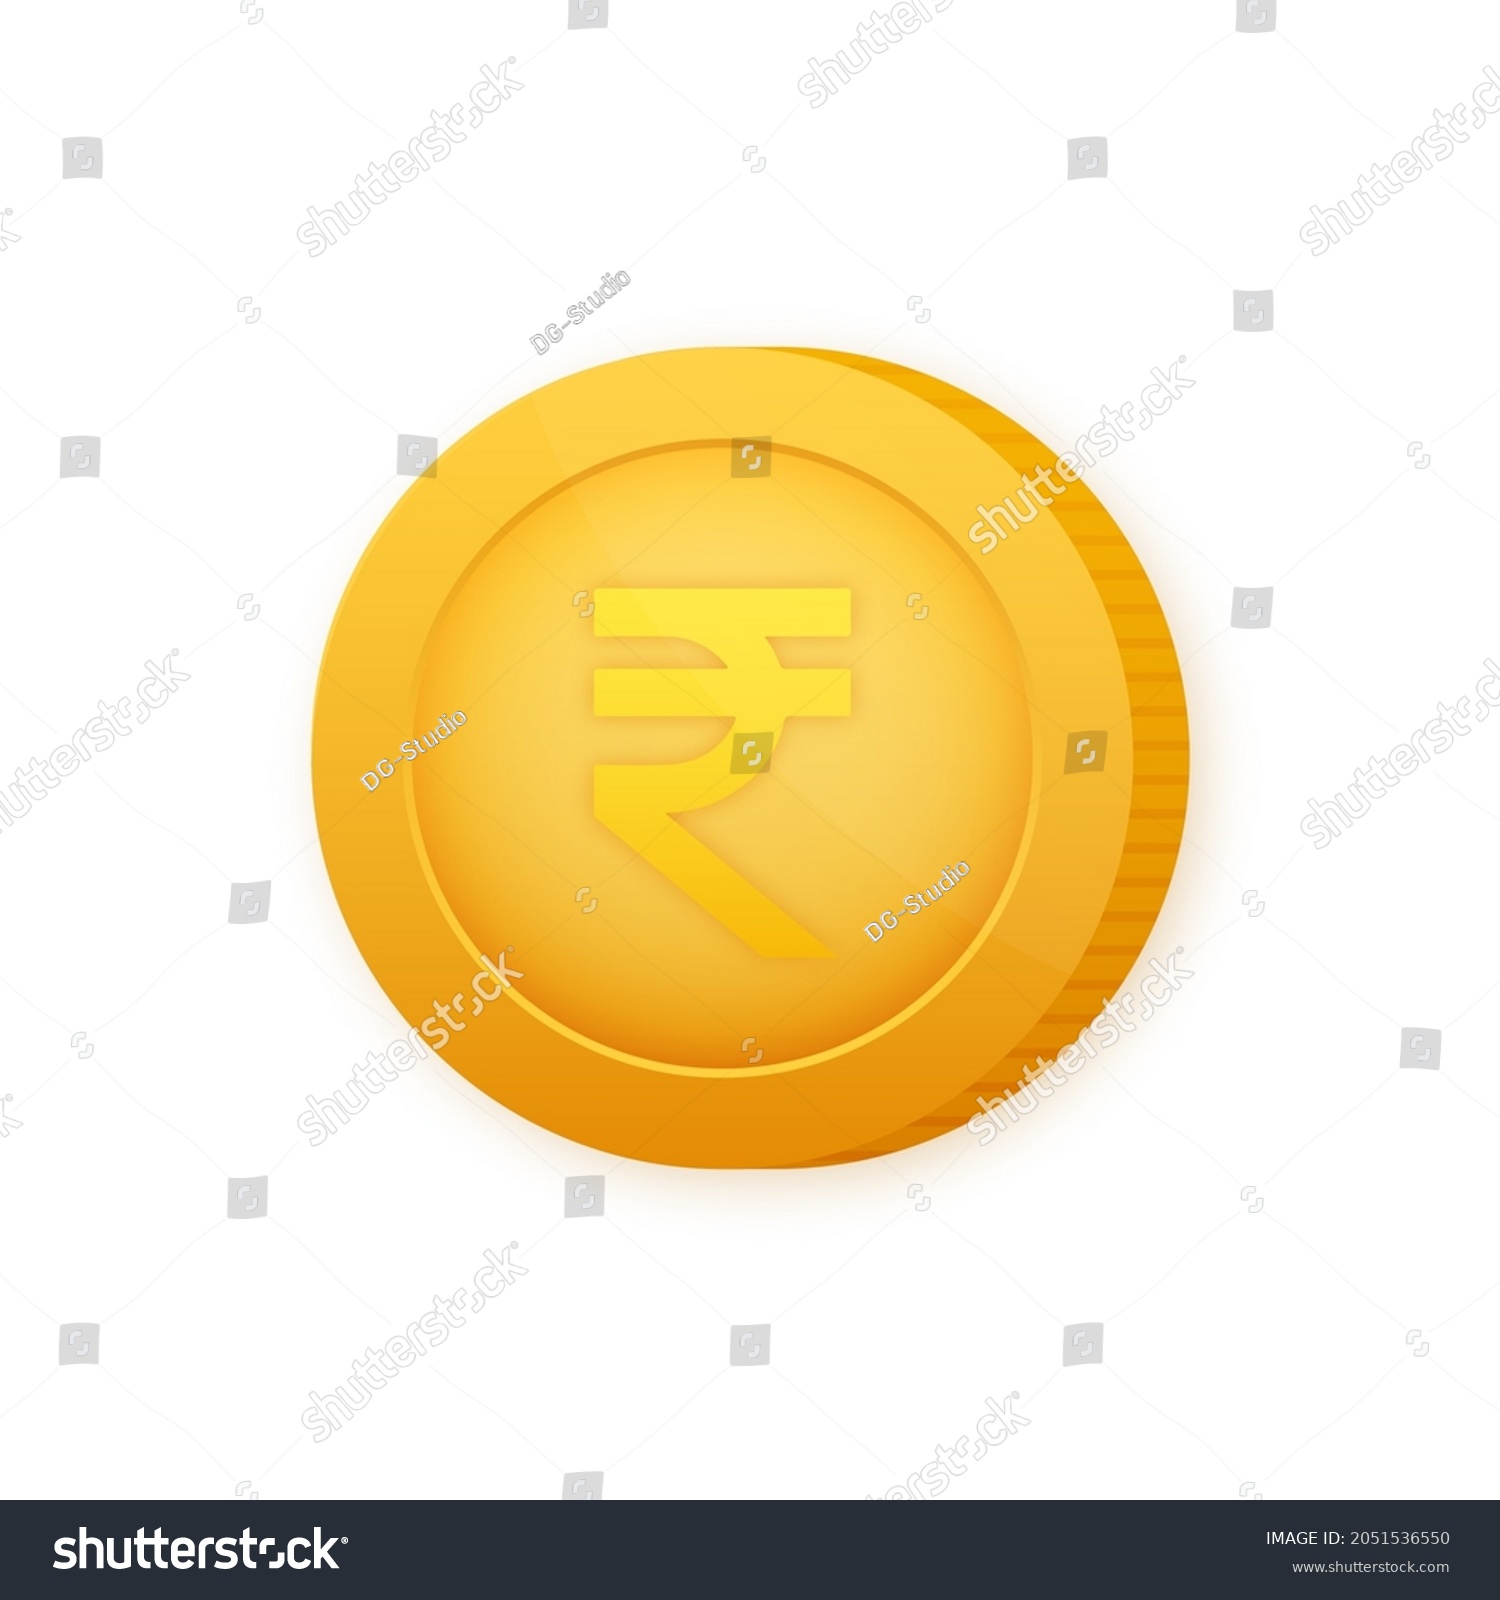 SVG of Rupee coin, great design for any purposes. Flat style vector illustration. Currency icon. svg